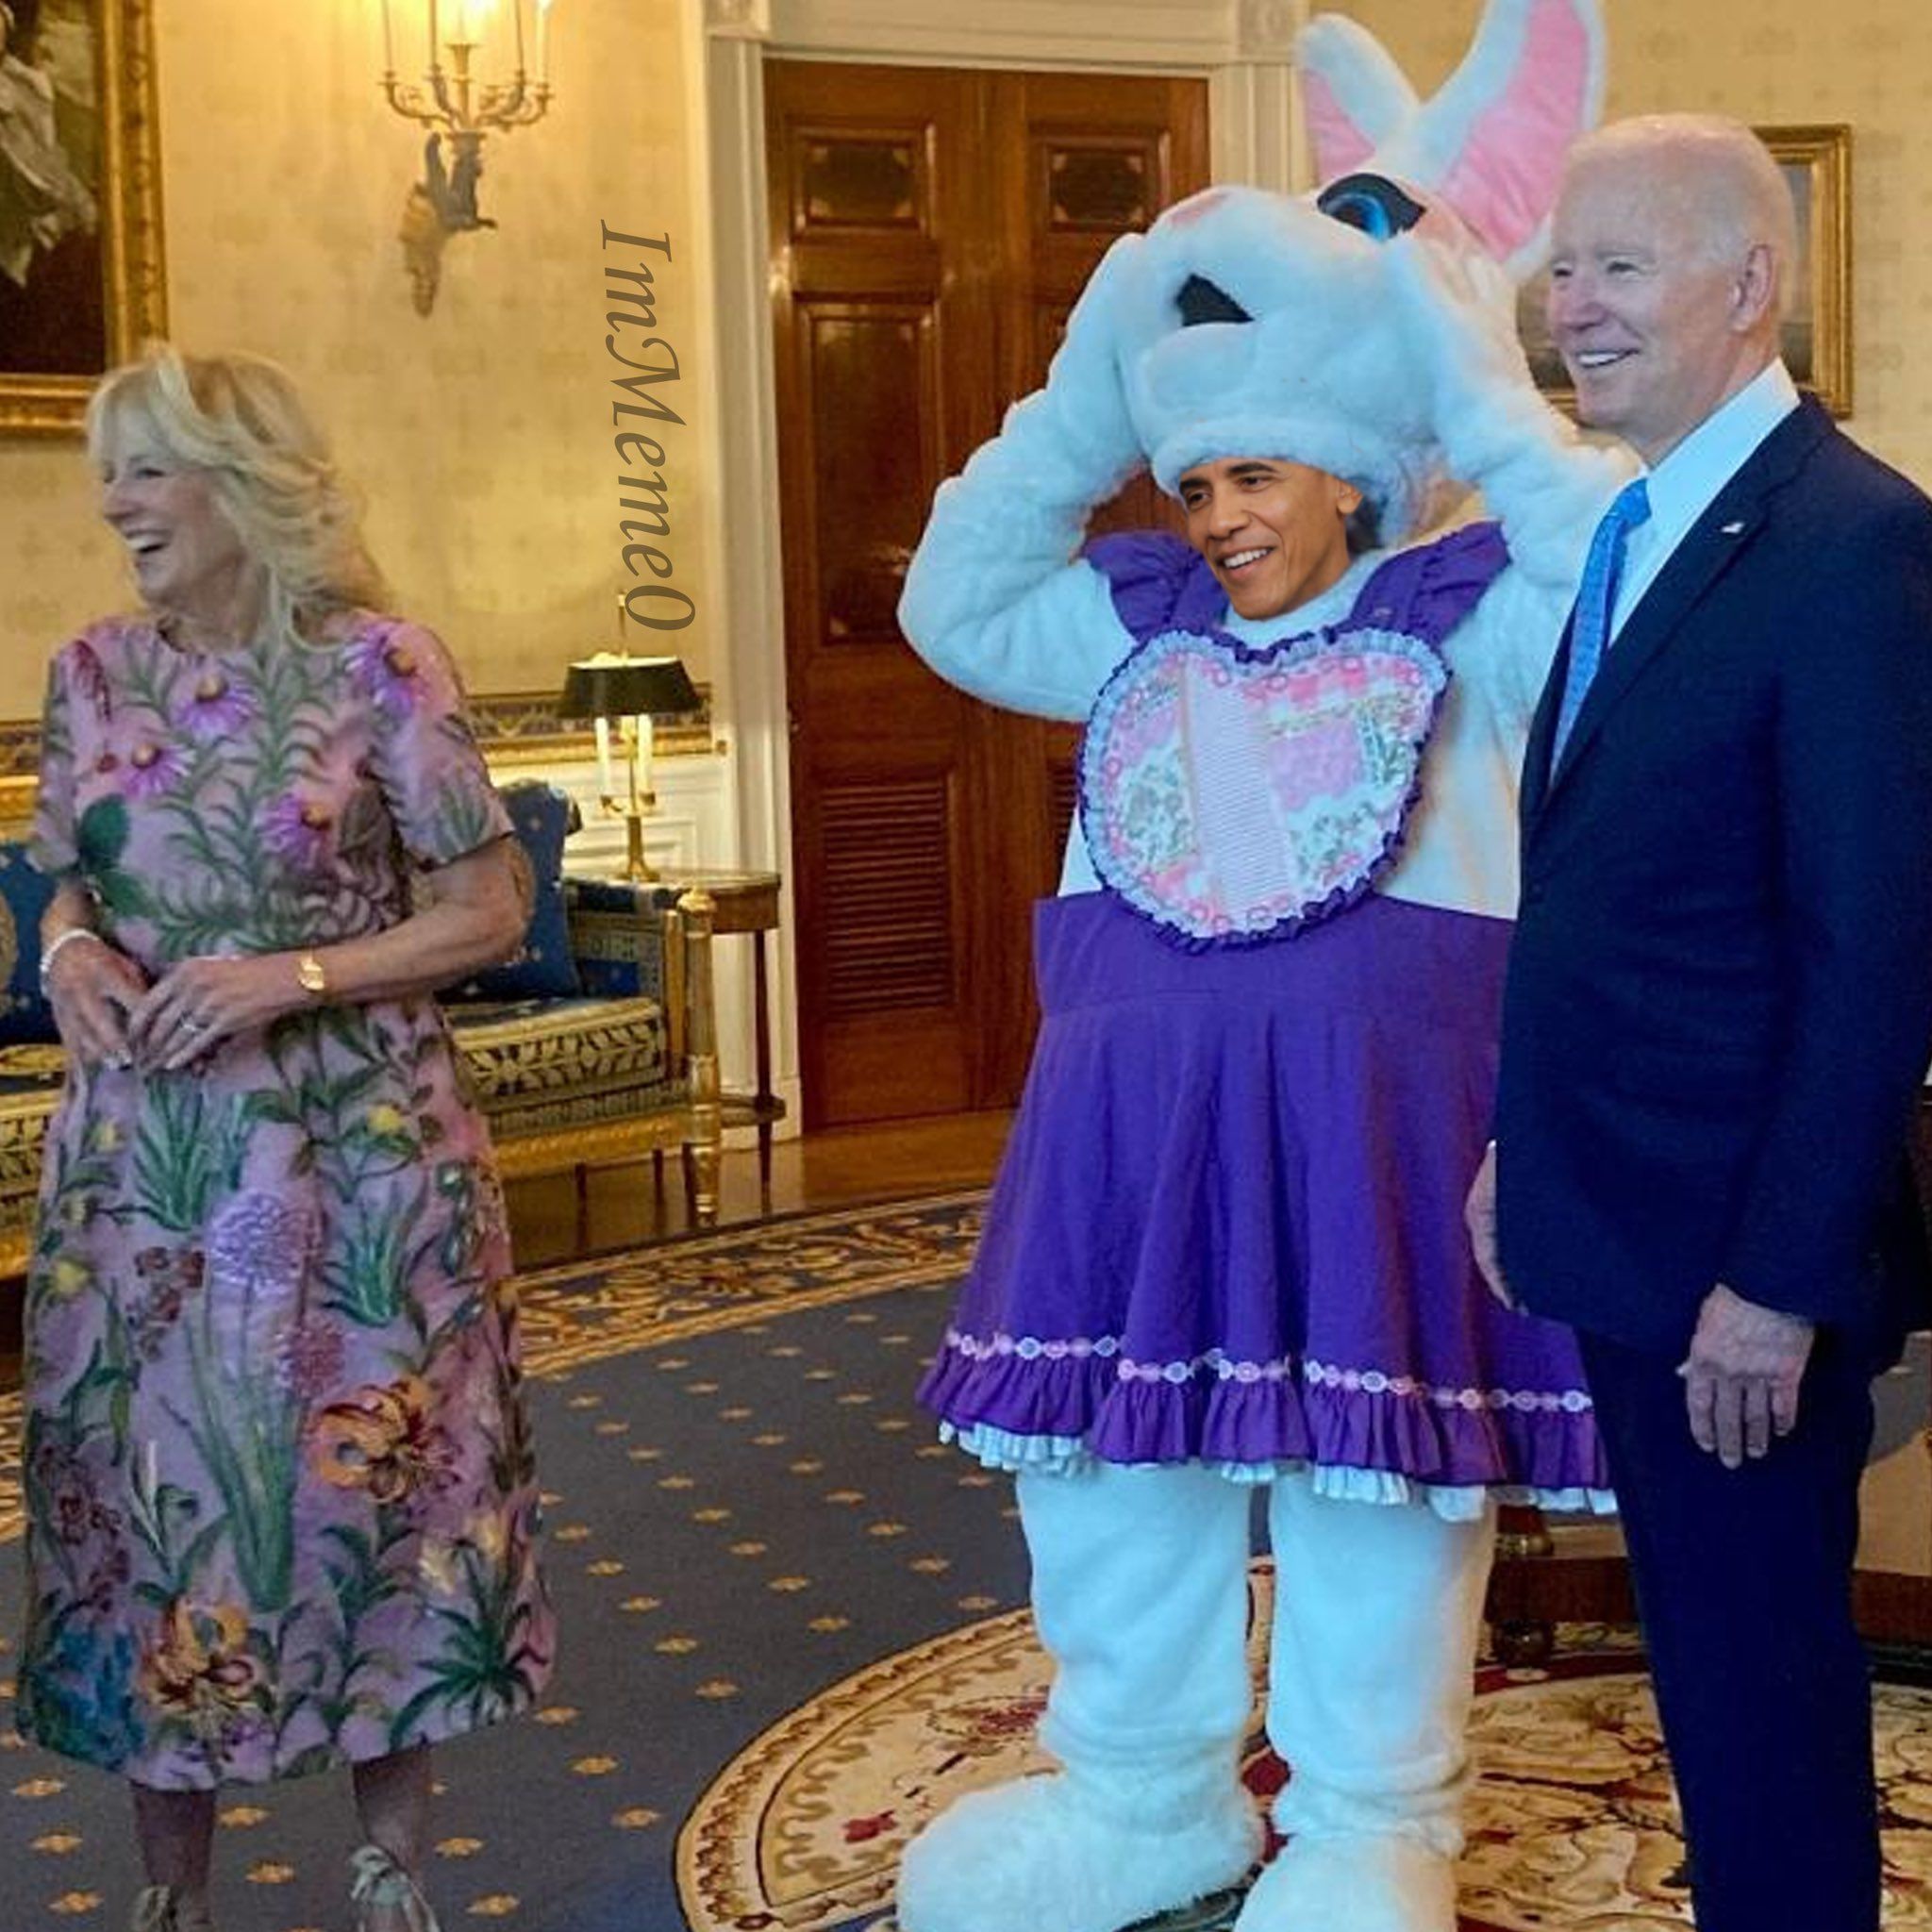 Another Easter Monday in the White House